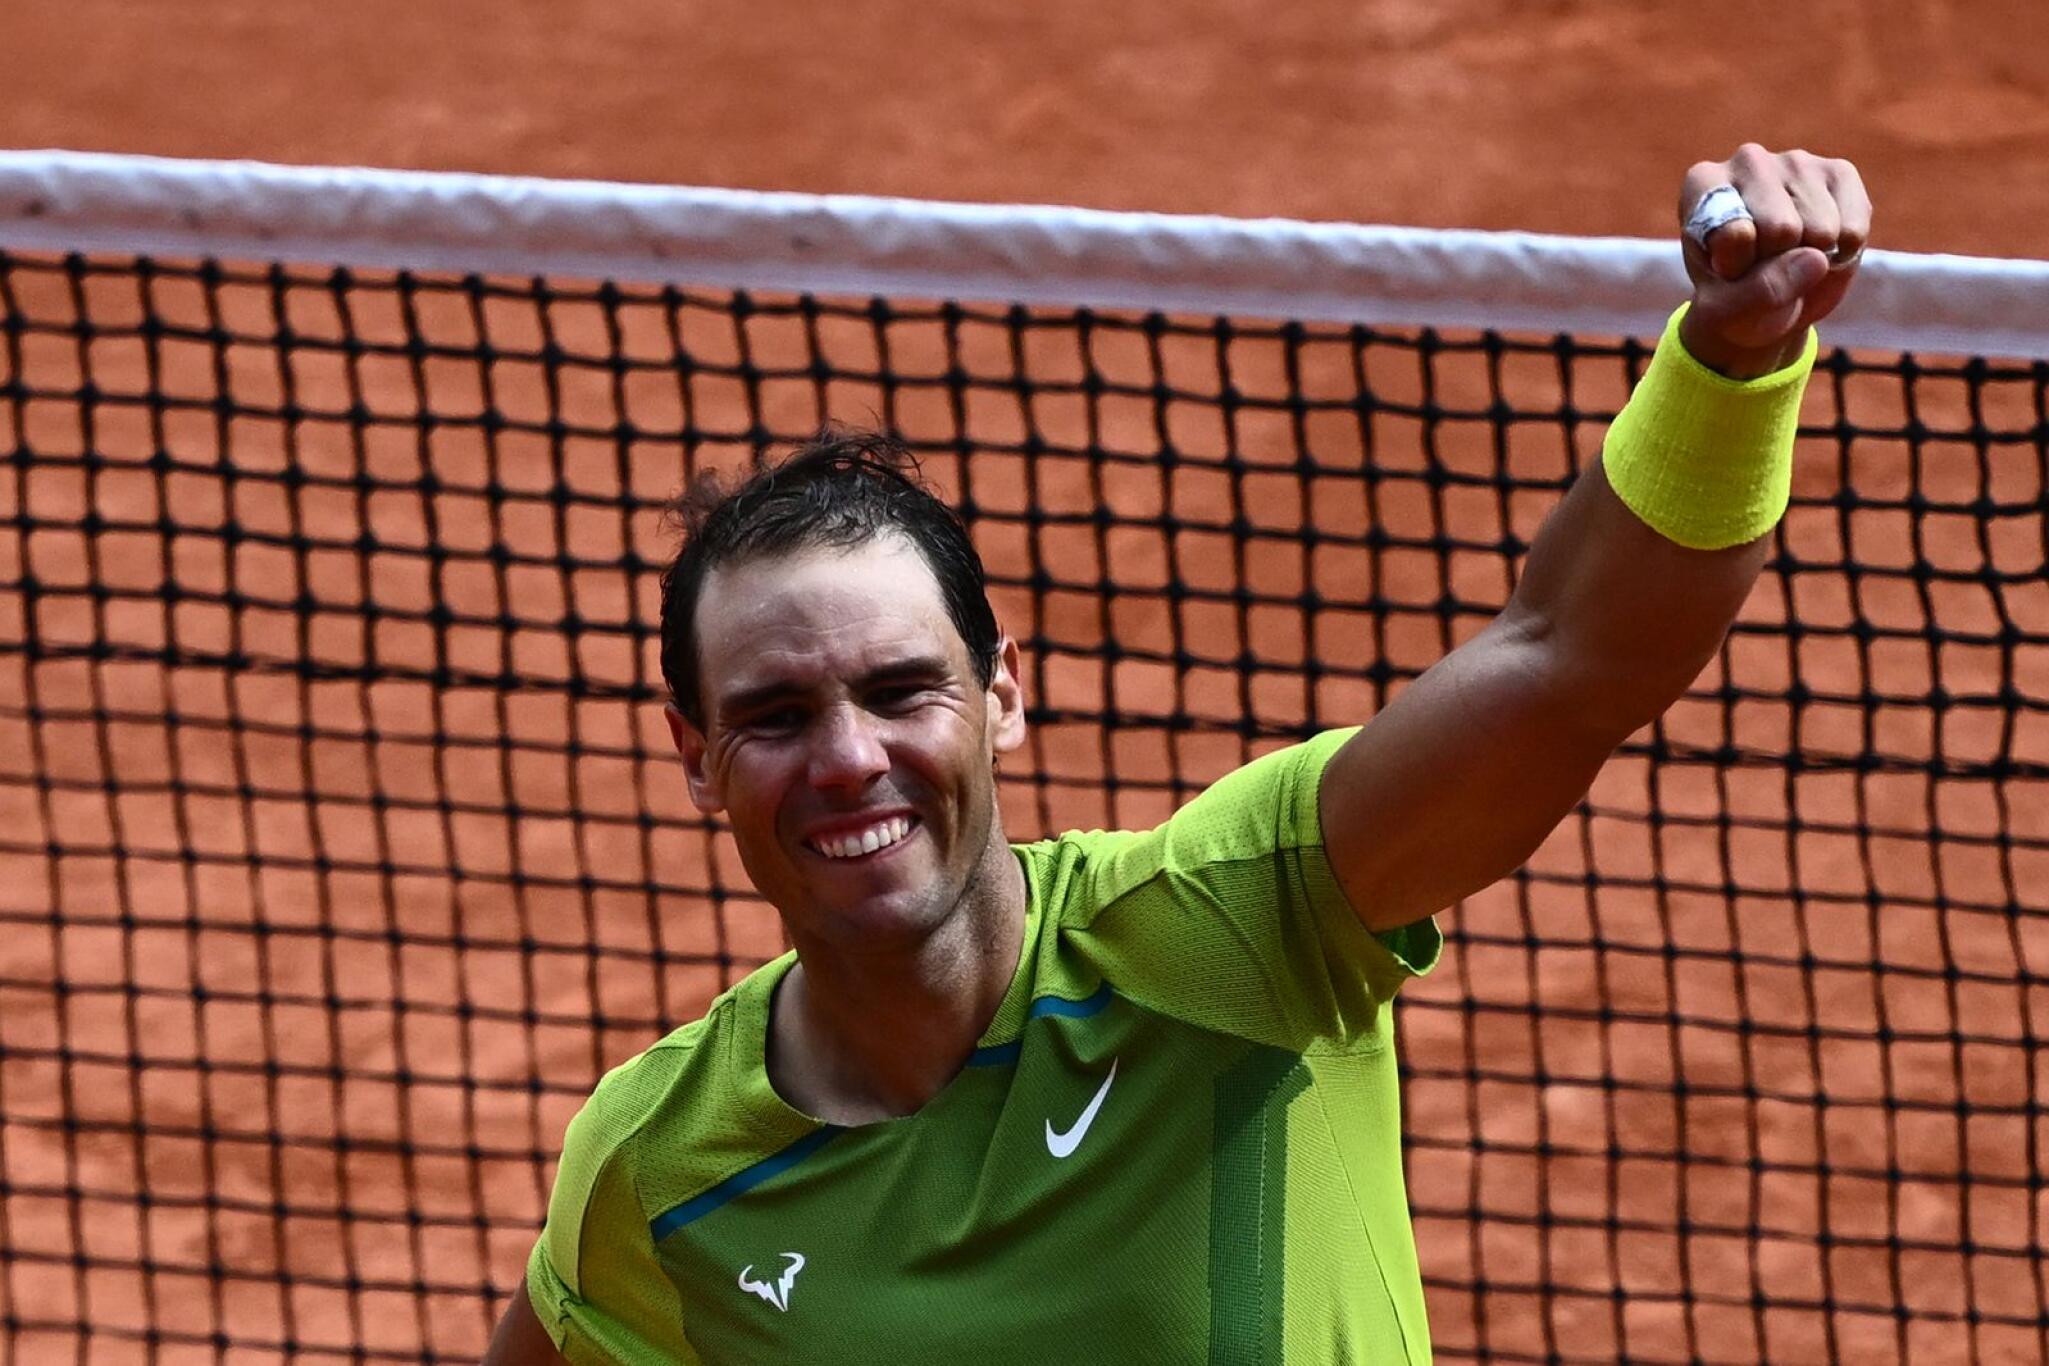 Spain's Rafael Nadal celebrates after winning against Norway's Casper Ruud at the end of their men's singles final match on day fifteen of the Roland-Garros Open tennis tournament at the Court Philippe-Chatrier in Paris on Sunday